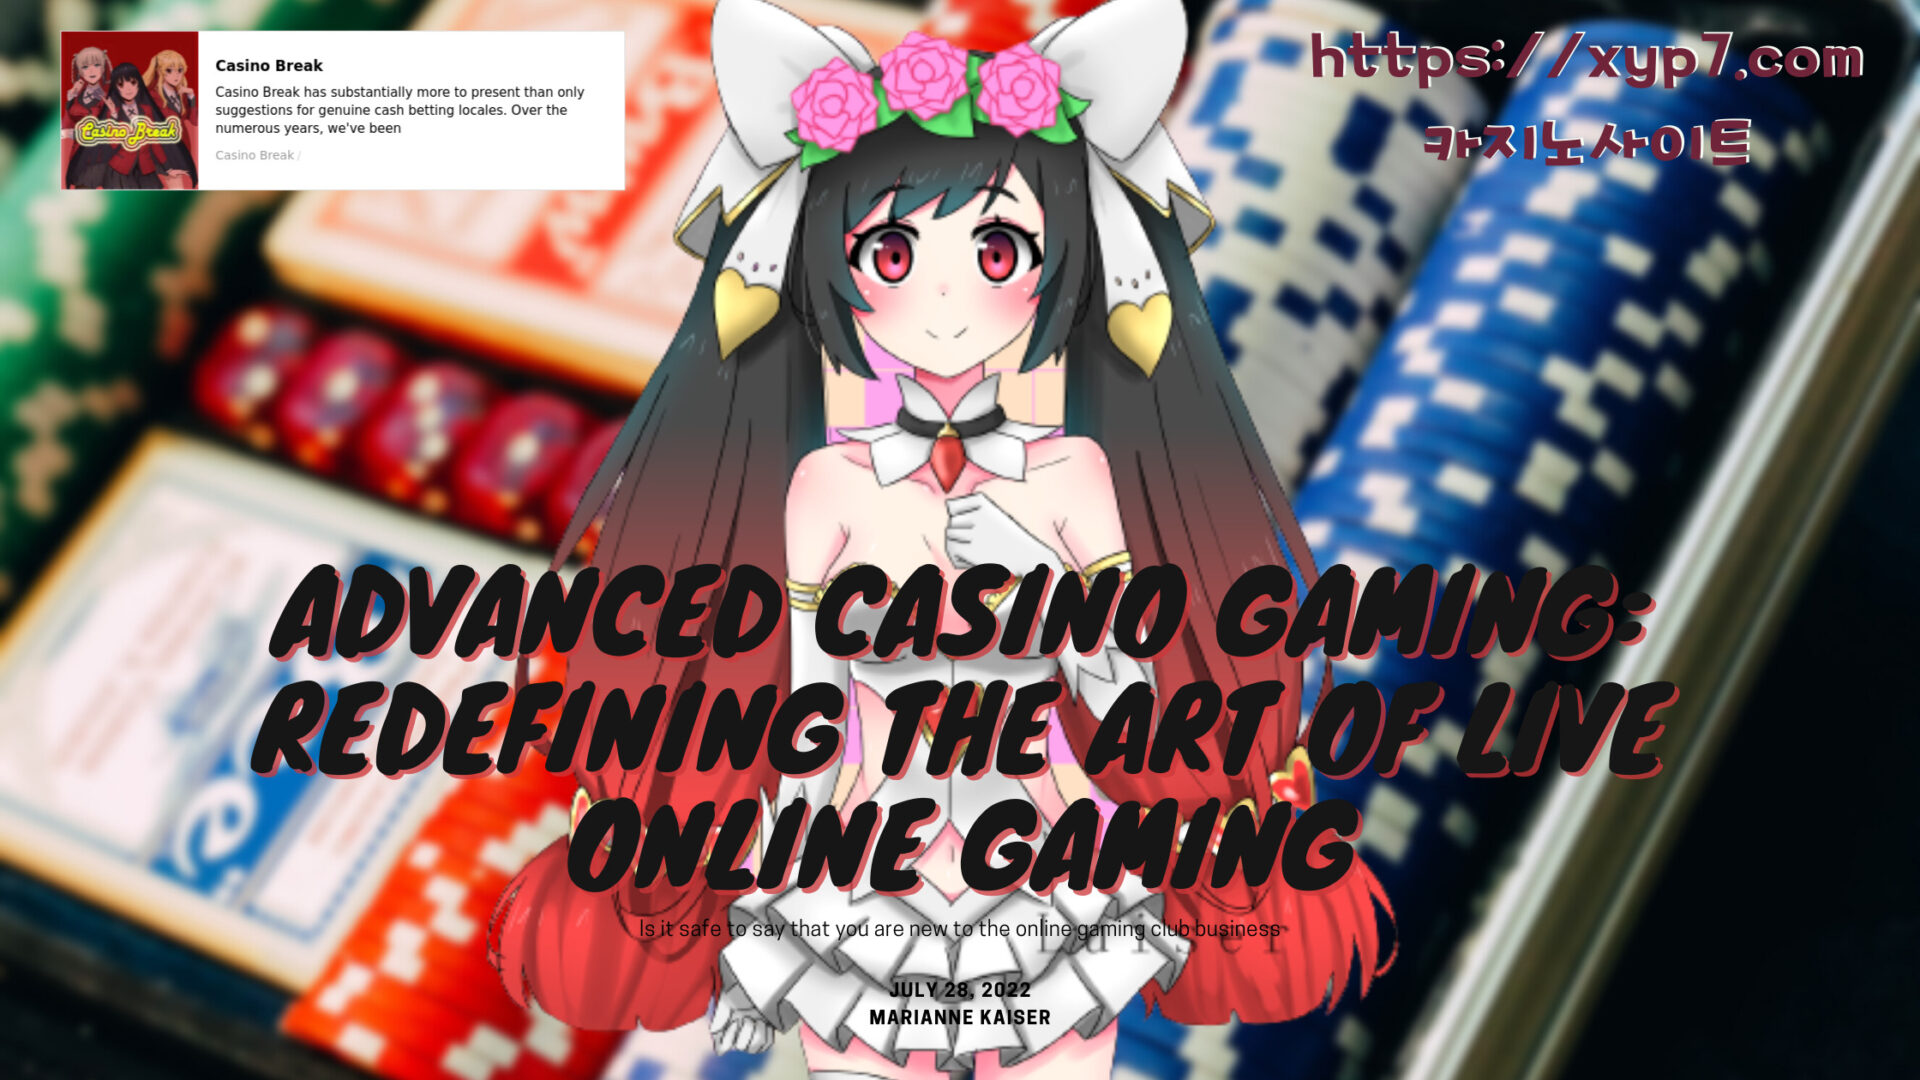 Is it safe to say that you are new to the online gaming club business